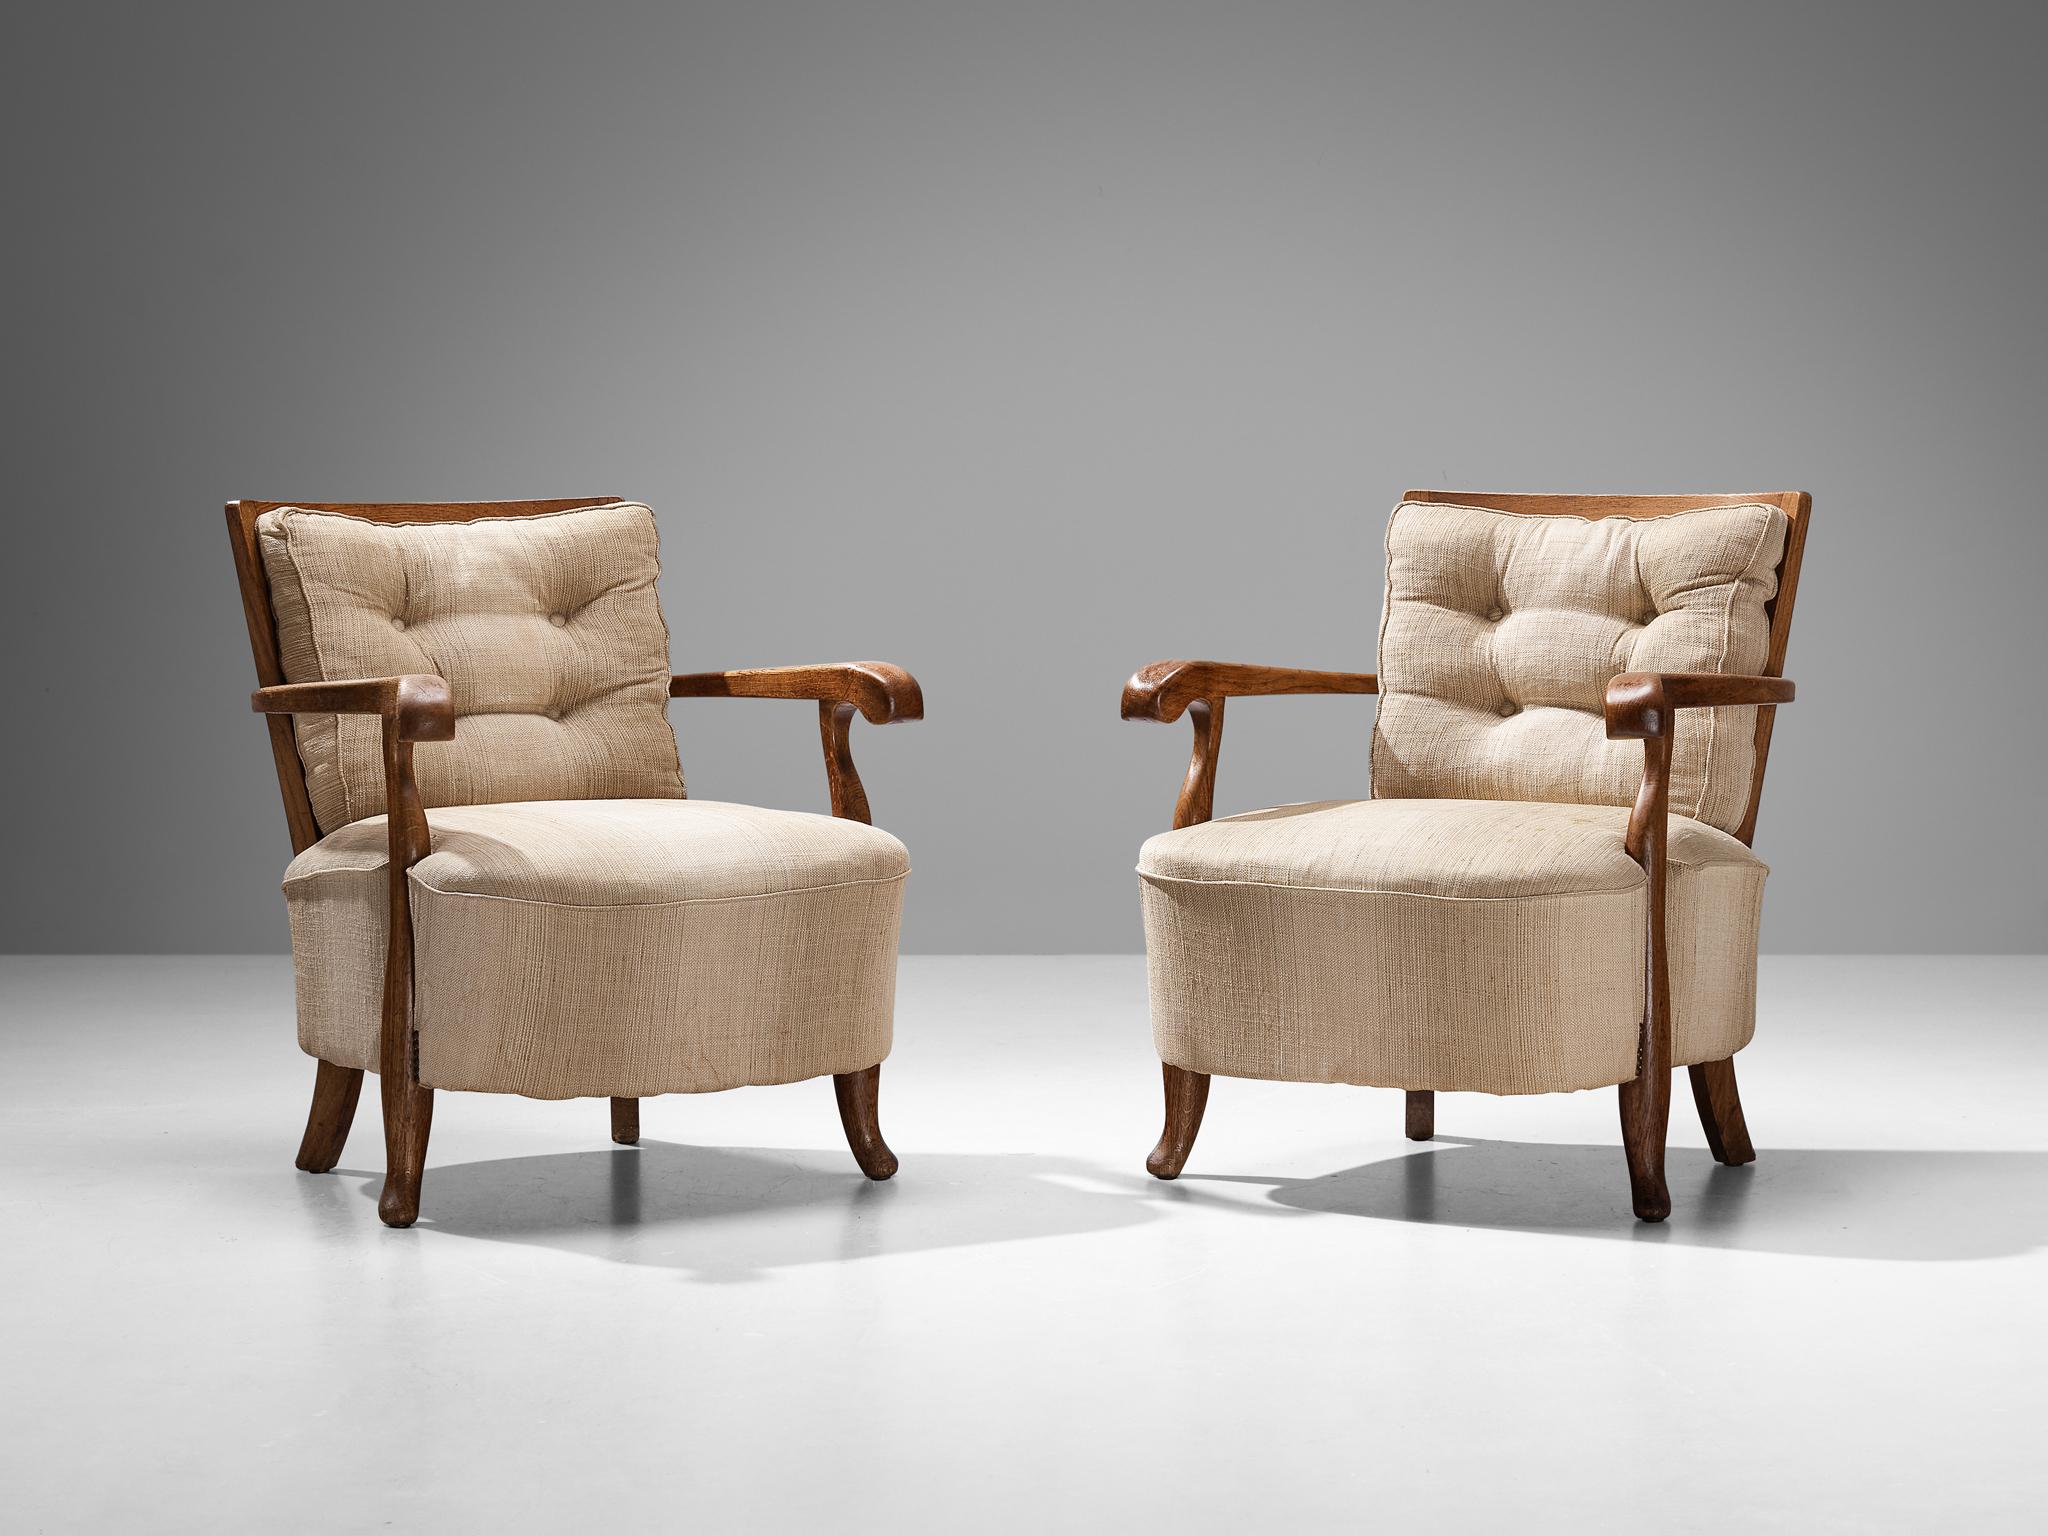 Pair of lounge chairs, oak, beige fabric upholstery, Italy, 1940s
 
Pair of Italian art deco lounge chairs with oak frames and remarkable proportions. The large upholstered seats and shorter rounded backrests form an inviting pair of armchairs